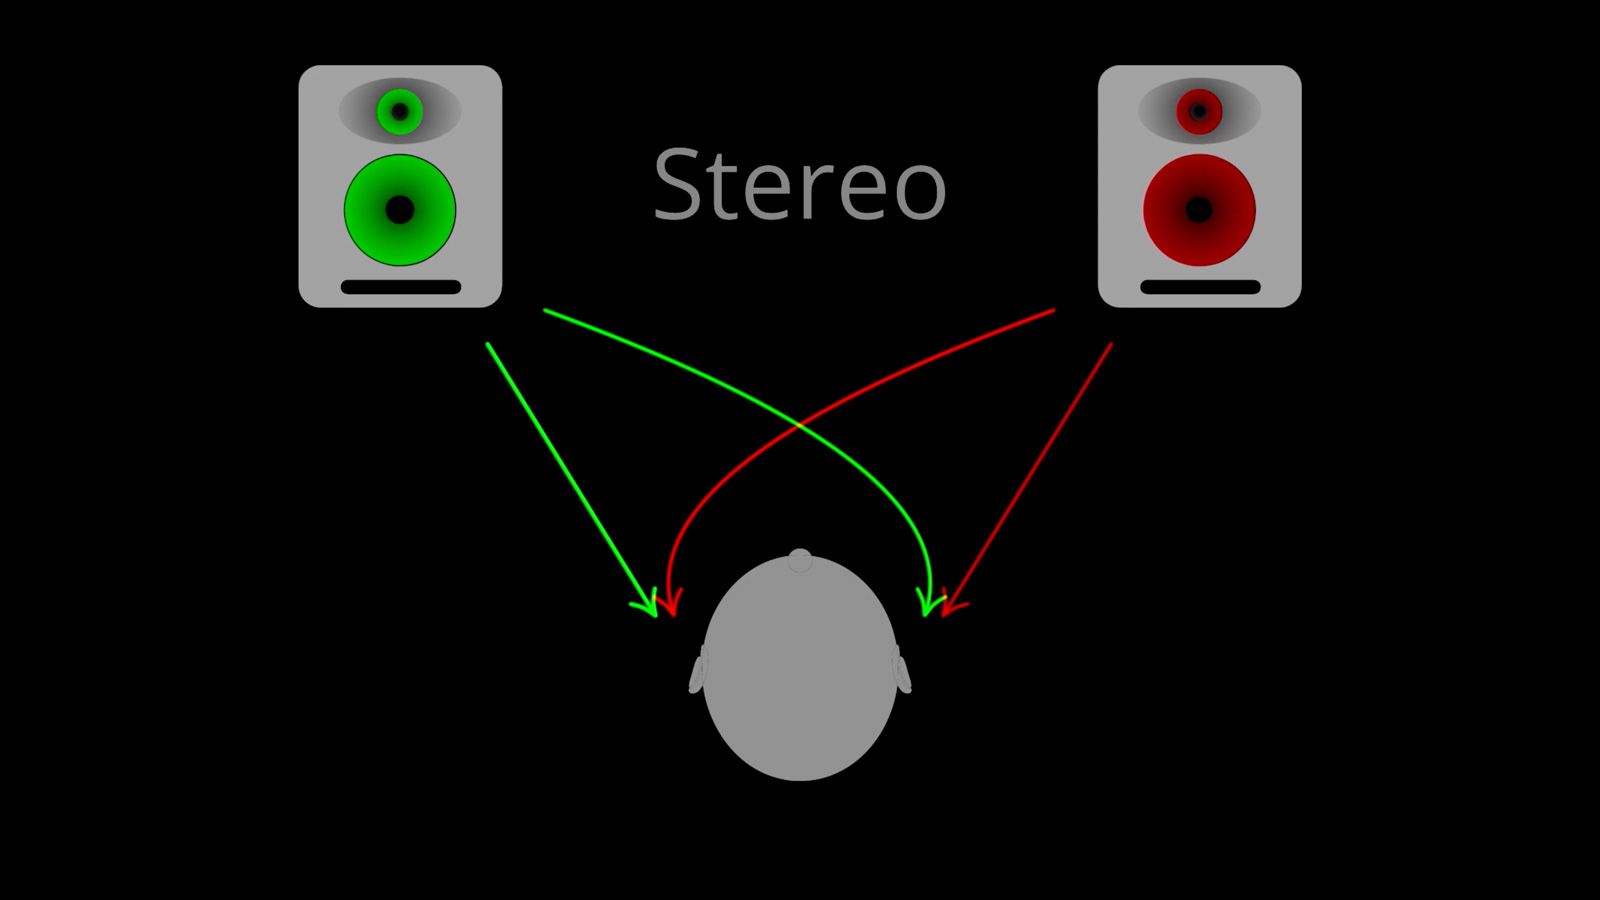 How to mix in stereo without sucking in mono (part 2)